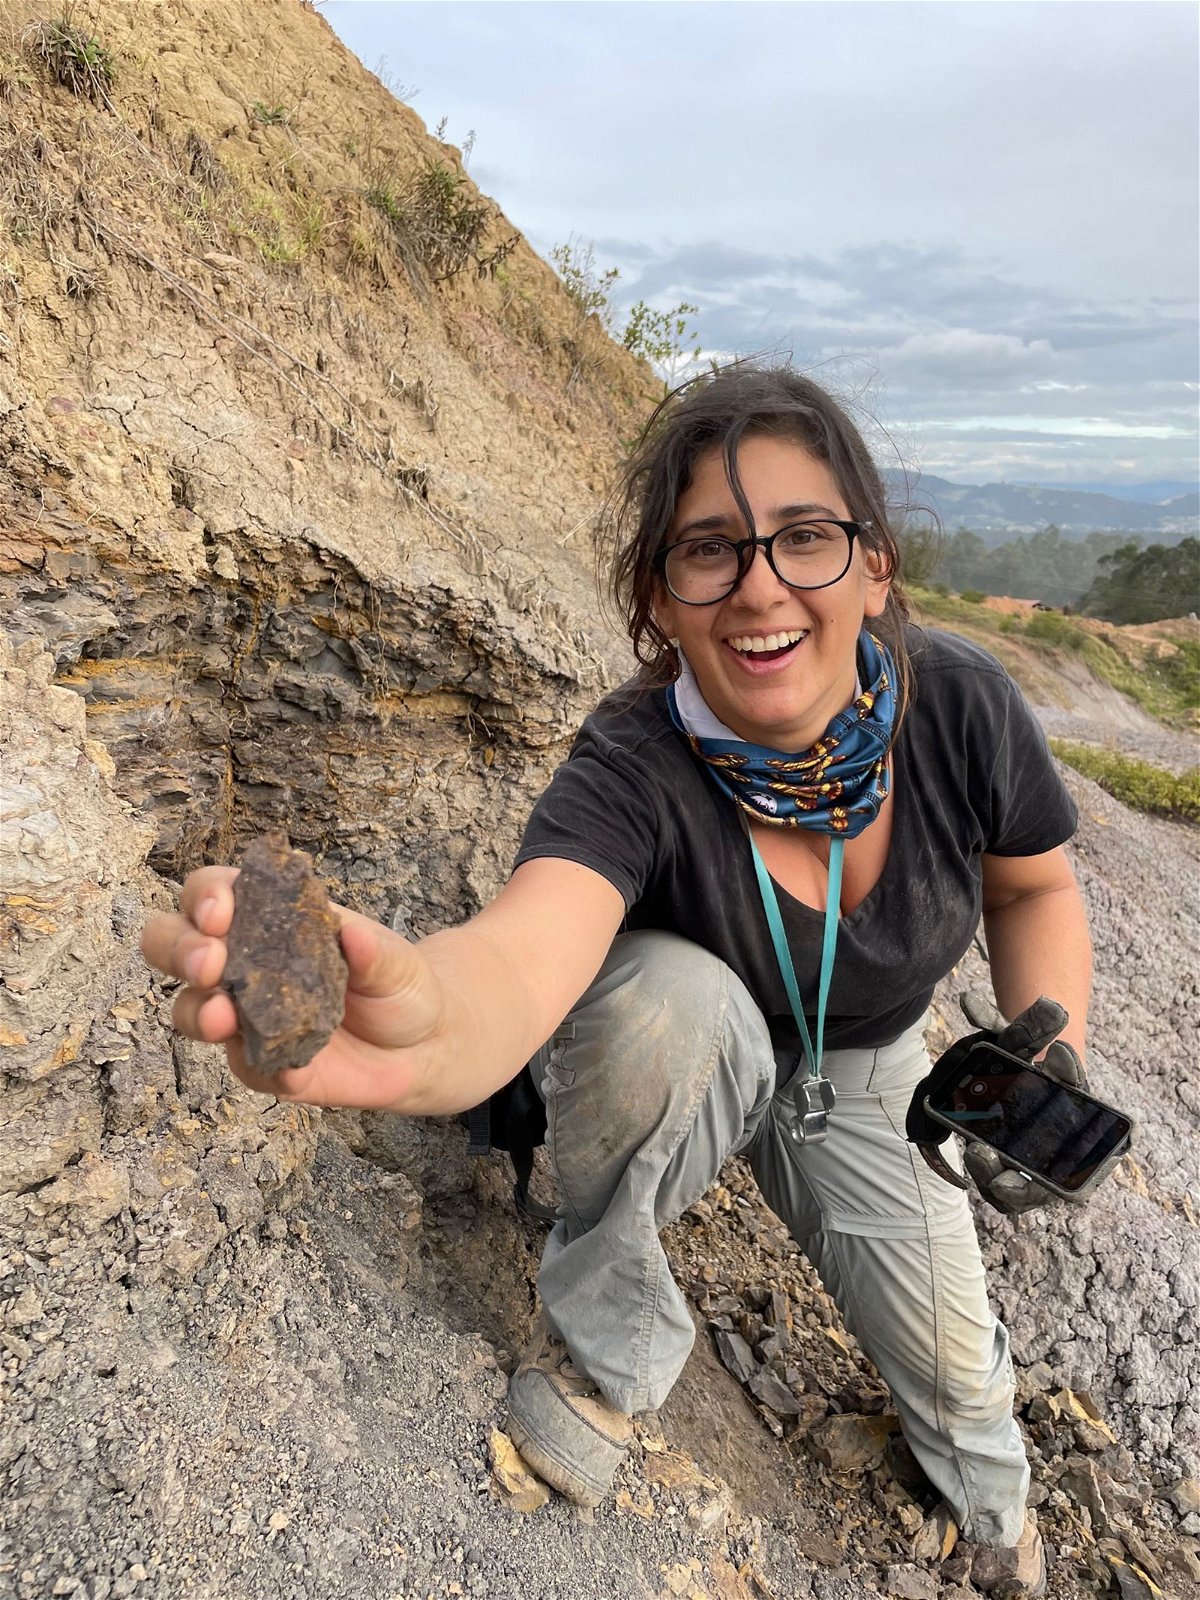 <i>Fabiany Herrera via CNN Newsource</i><br/>Mónica Carvalho can be seen holding the newly discovered earliest grape from the Western Hemisphere at the dig site in Colombia.